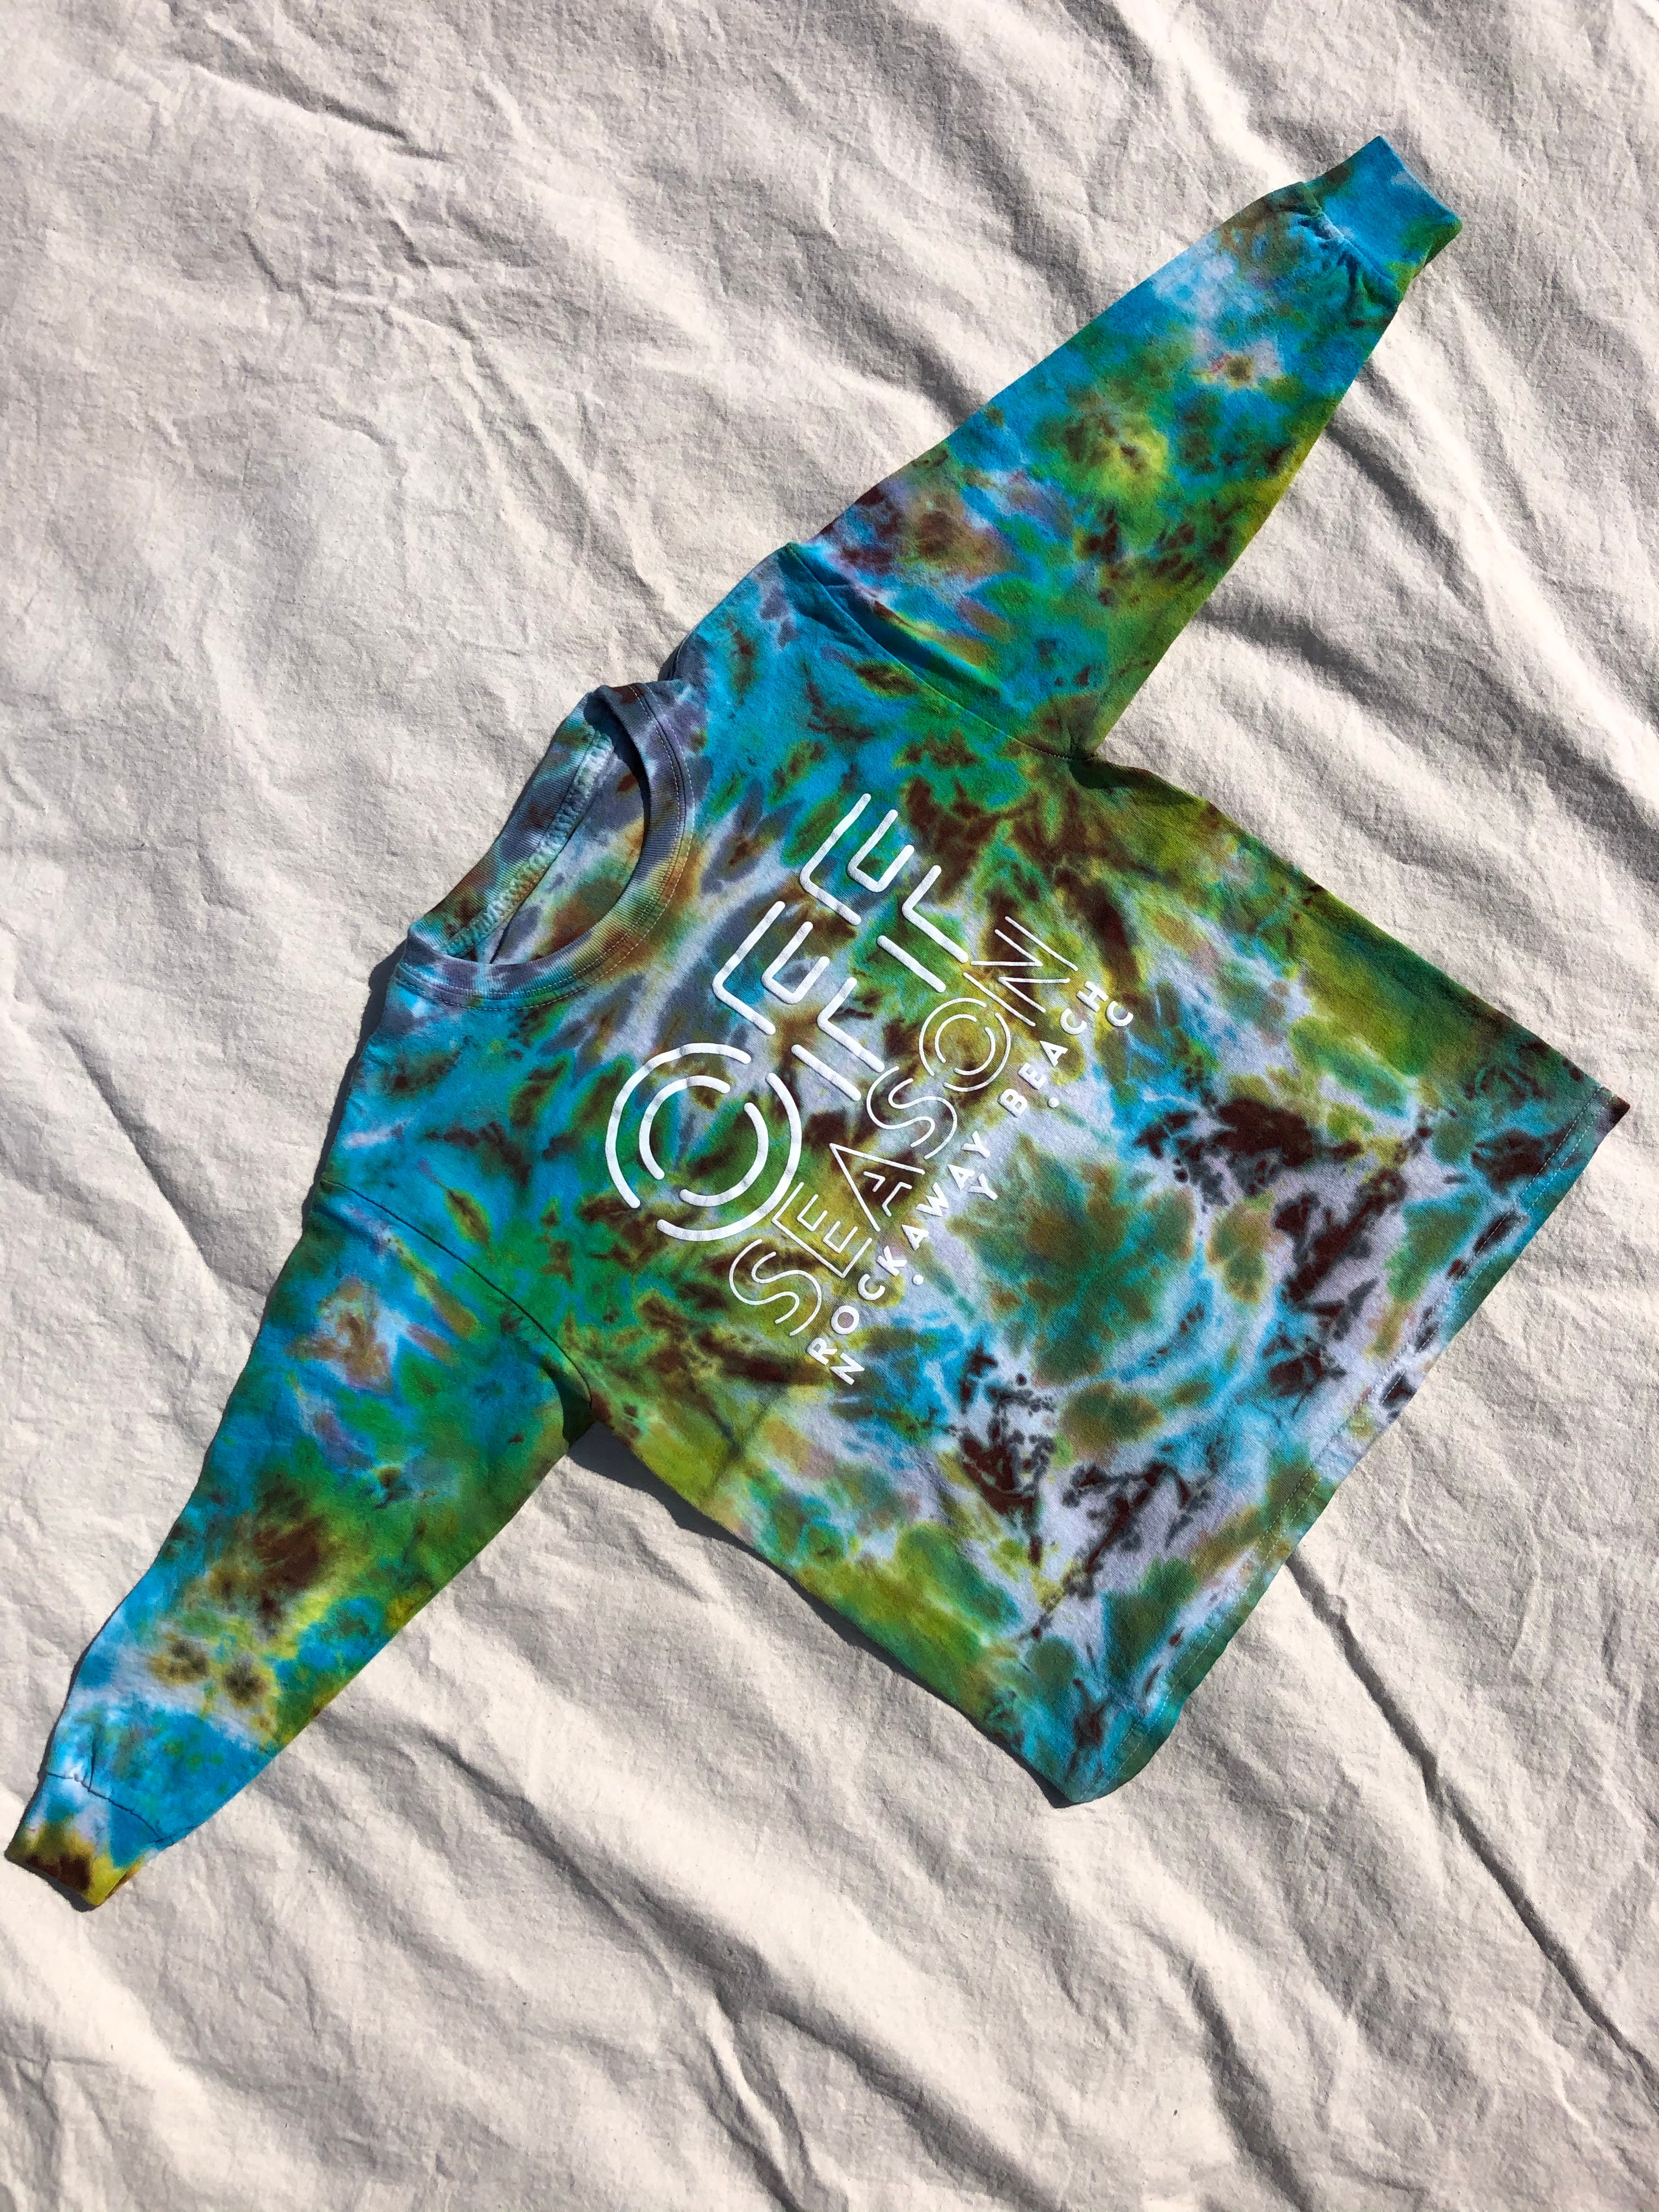 Youth Tie Dye Top #12 (size S)